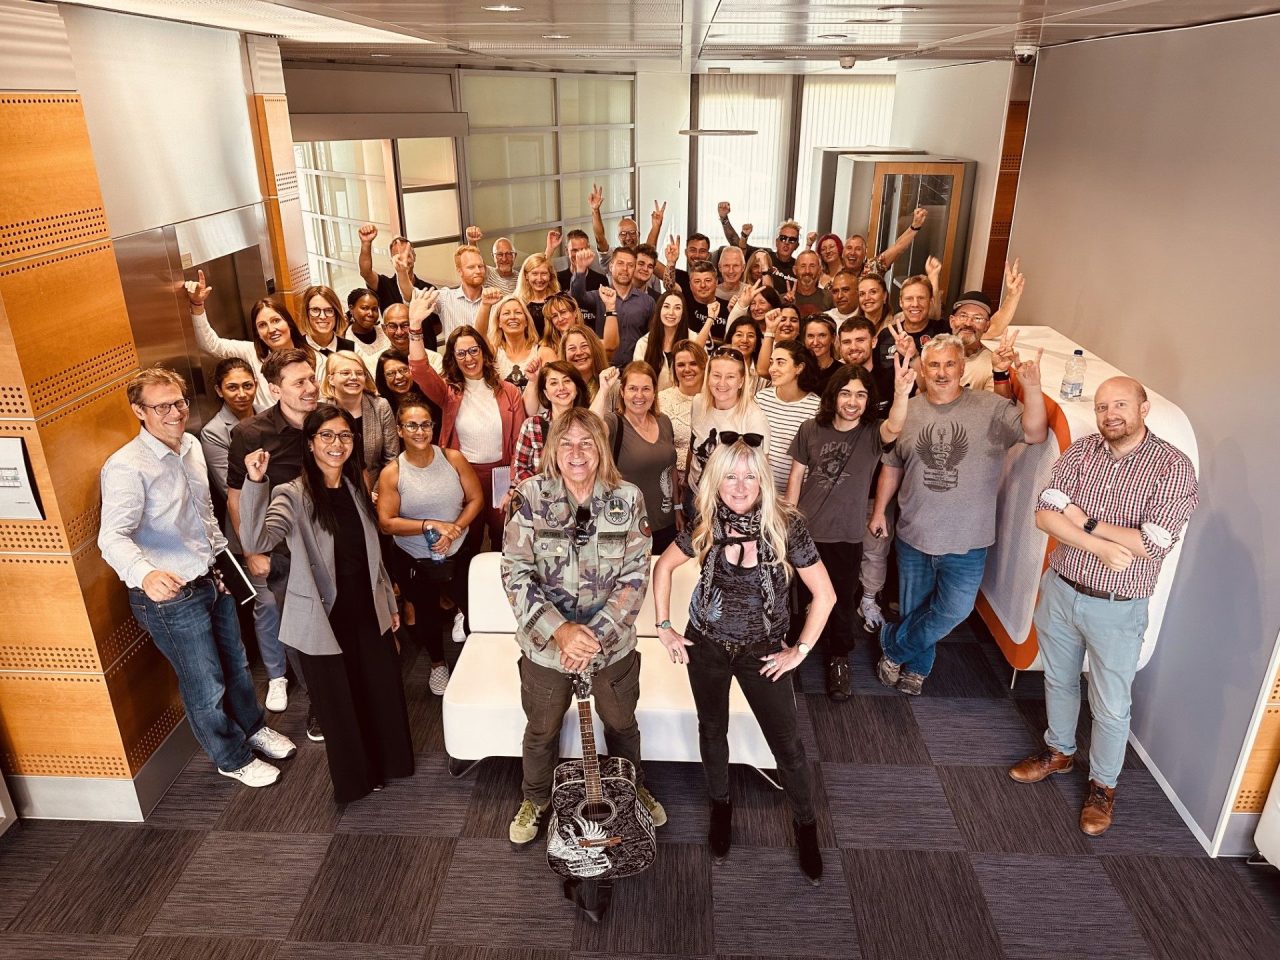 We were honored to host Welsh rockstar Mike Peters and the Love Hope Strength Cancer Foundation team at our offices ahead of their inspiring “Rock the Alps” trek in support of cancer care. – Union for International Cancer Control (UICC)